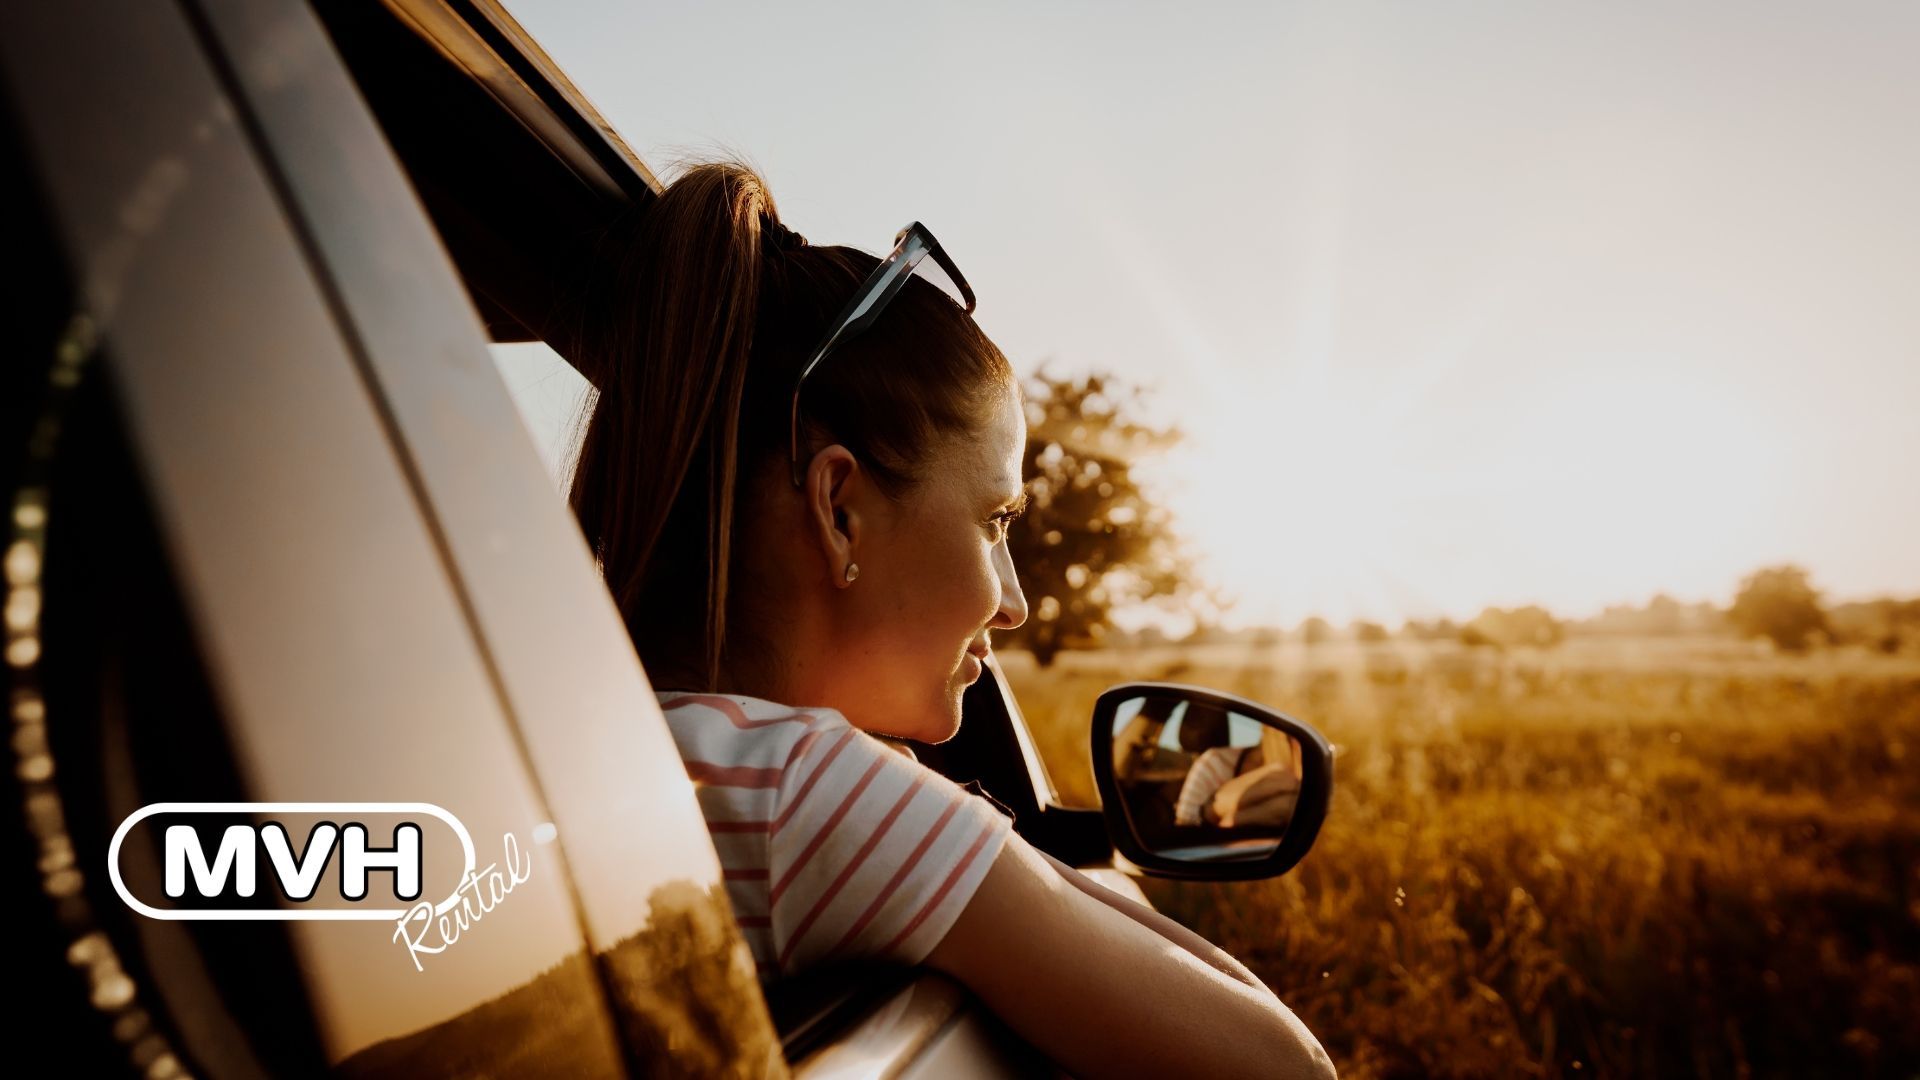 If you want to make the most of your next road trip, don't forget your toothbrush – or any of the other little things that keep you ticking over nicely.